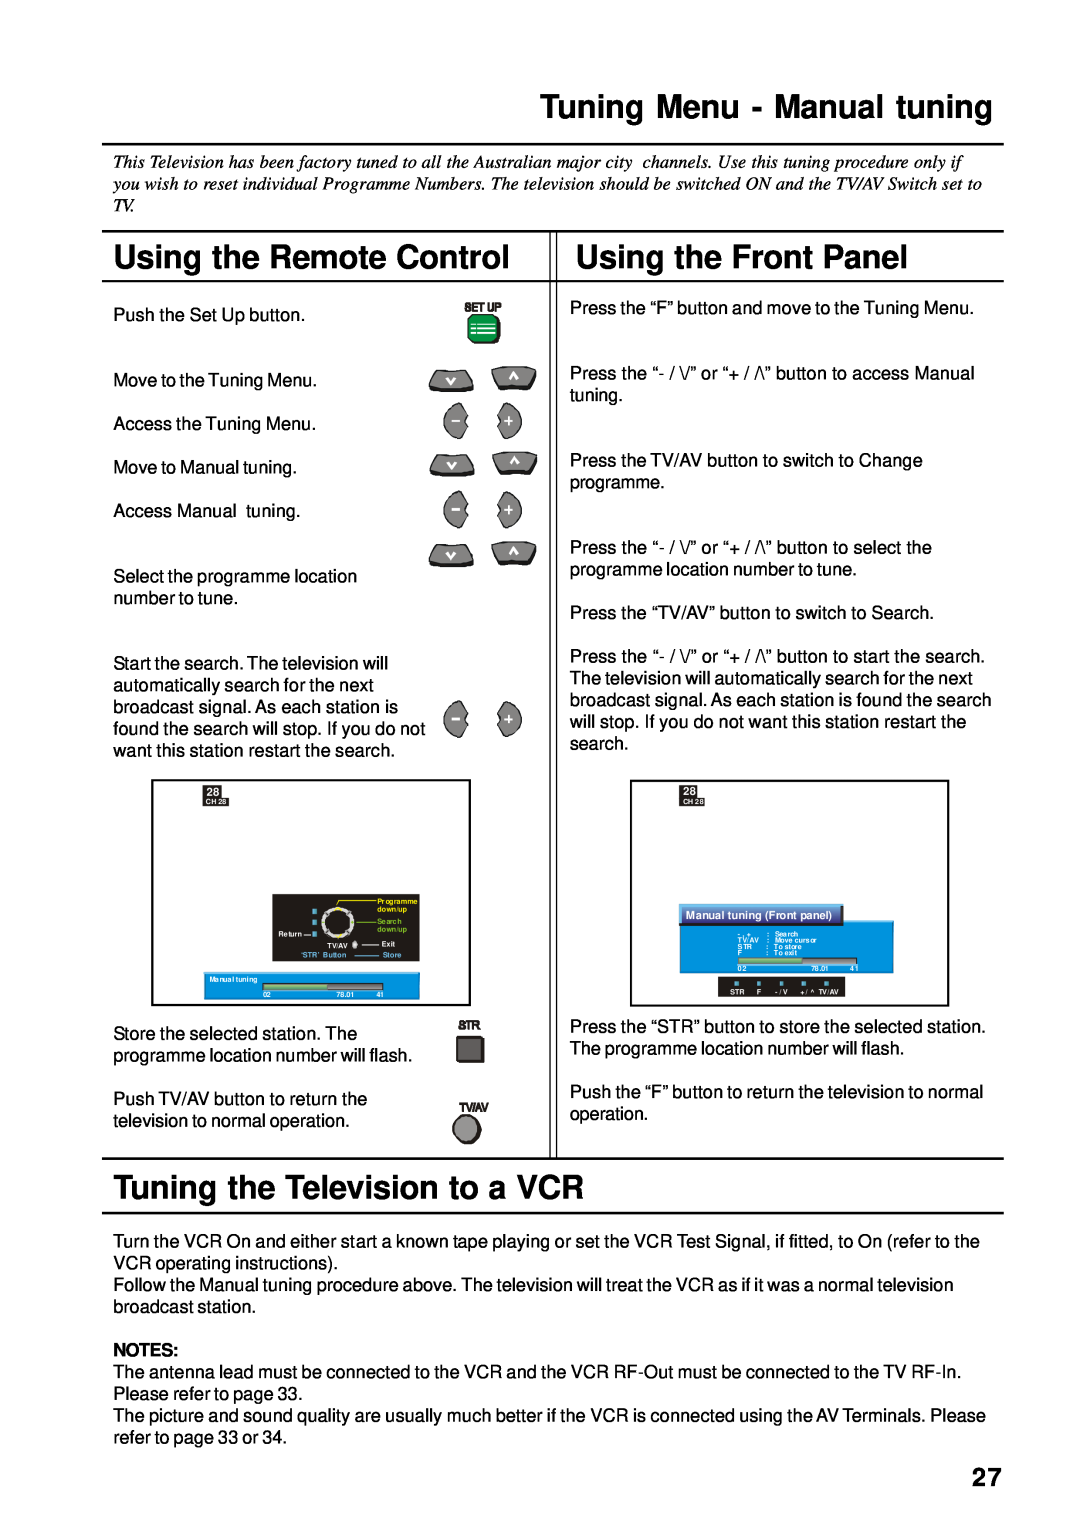 Panasonic TX-66PW60A Tuning Menu - Manual tuning, Tuning the Television to a VCR, Using the Remote Control, operation 